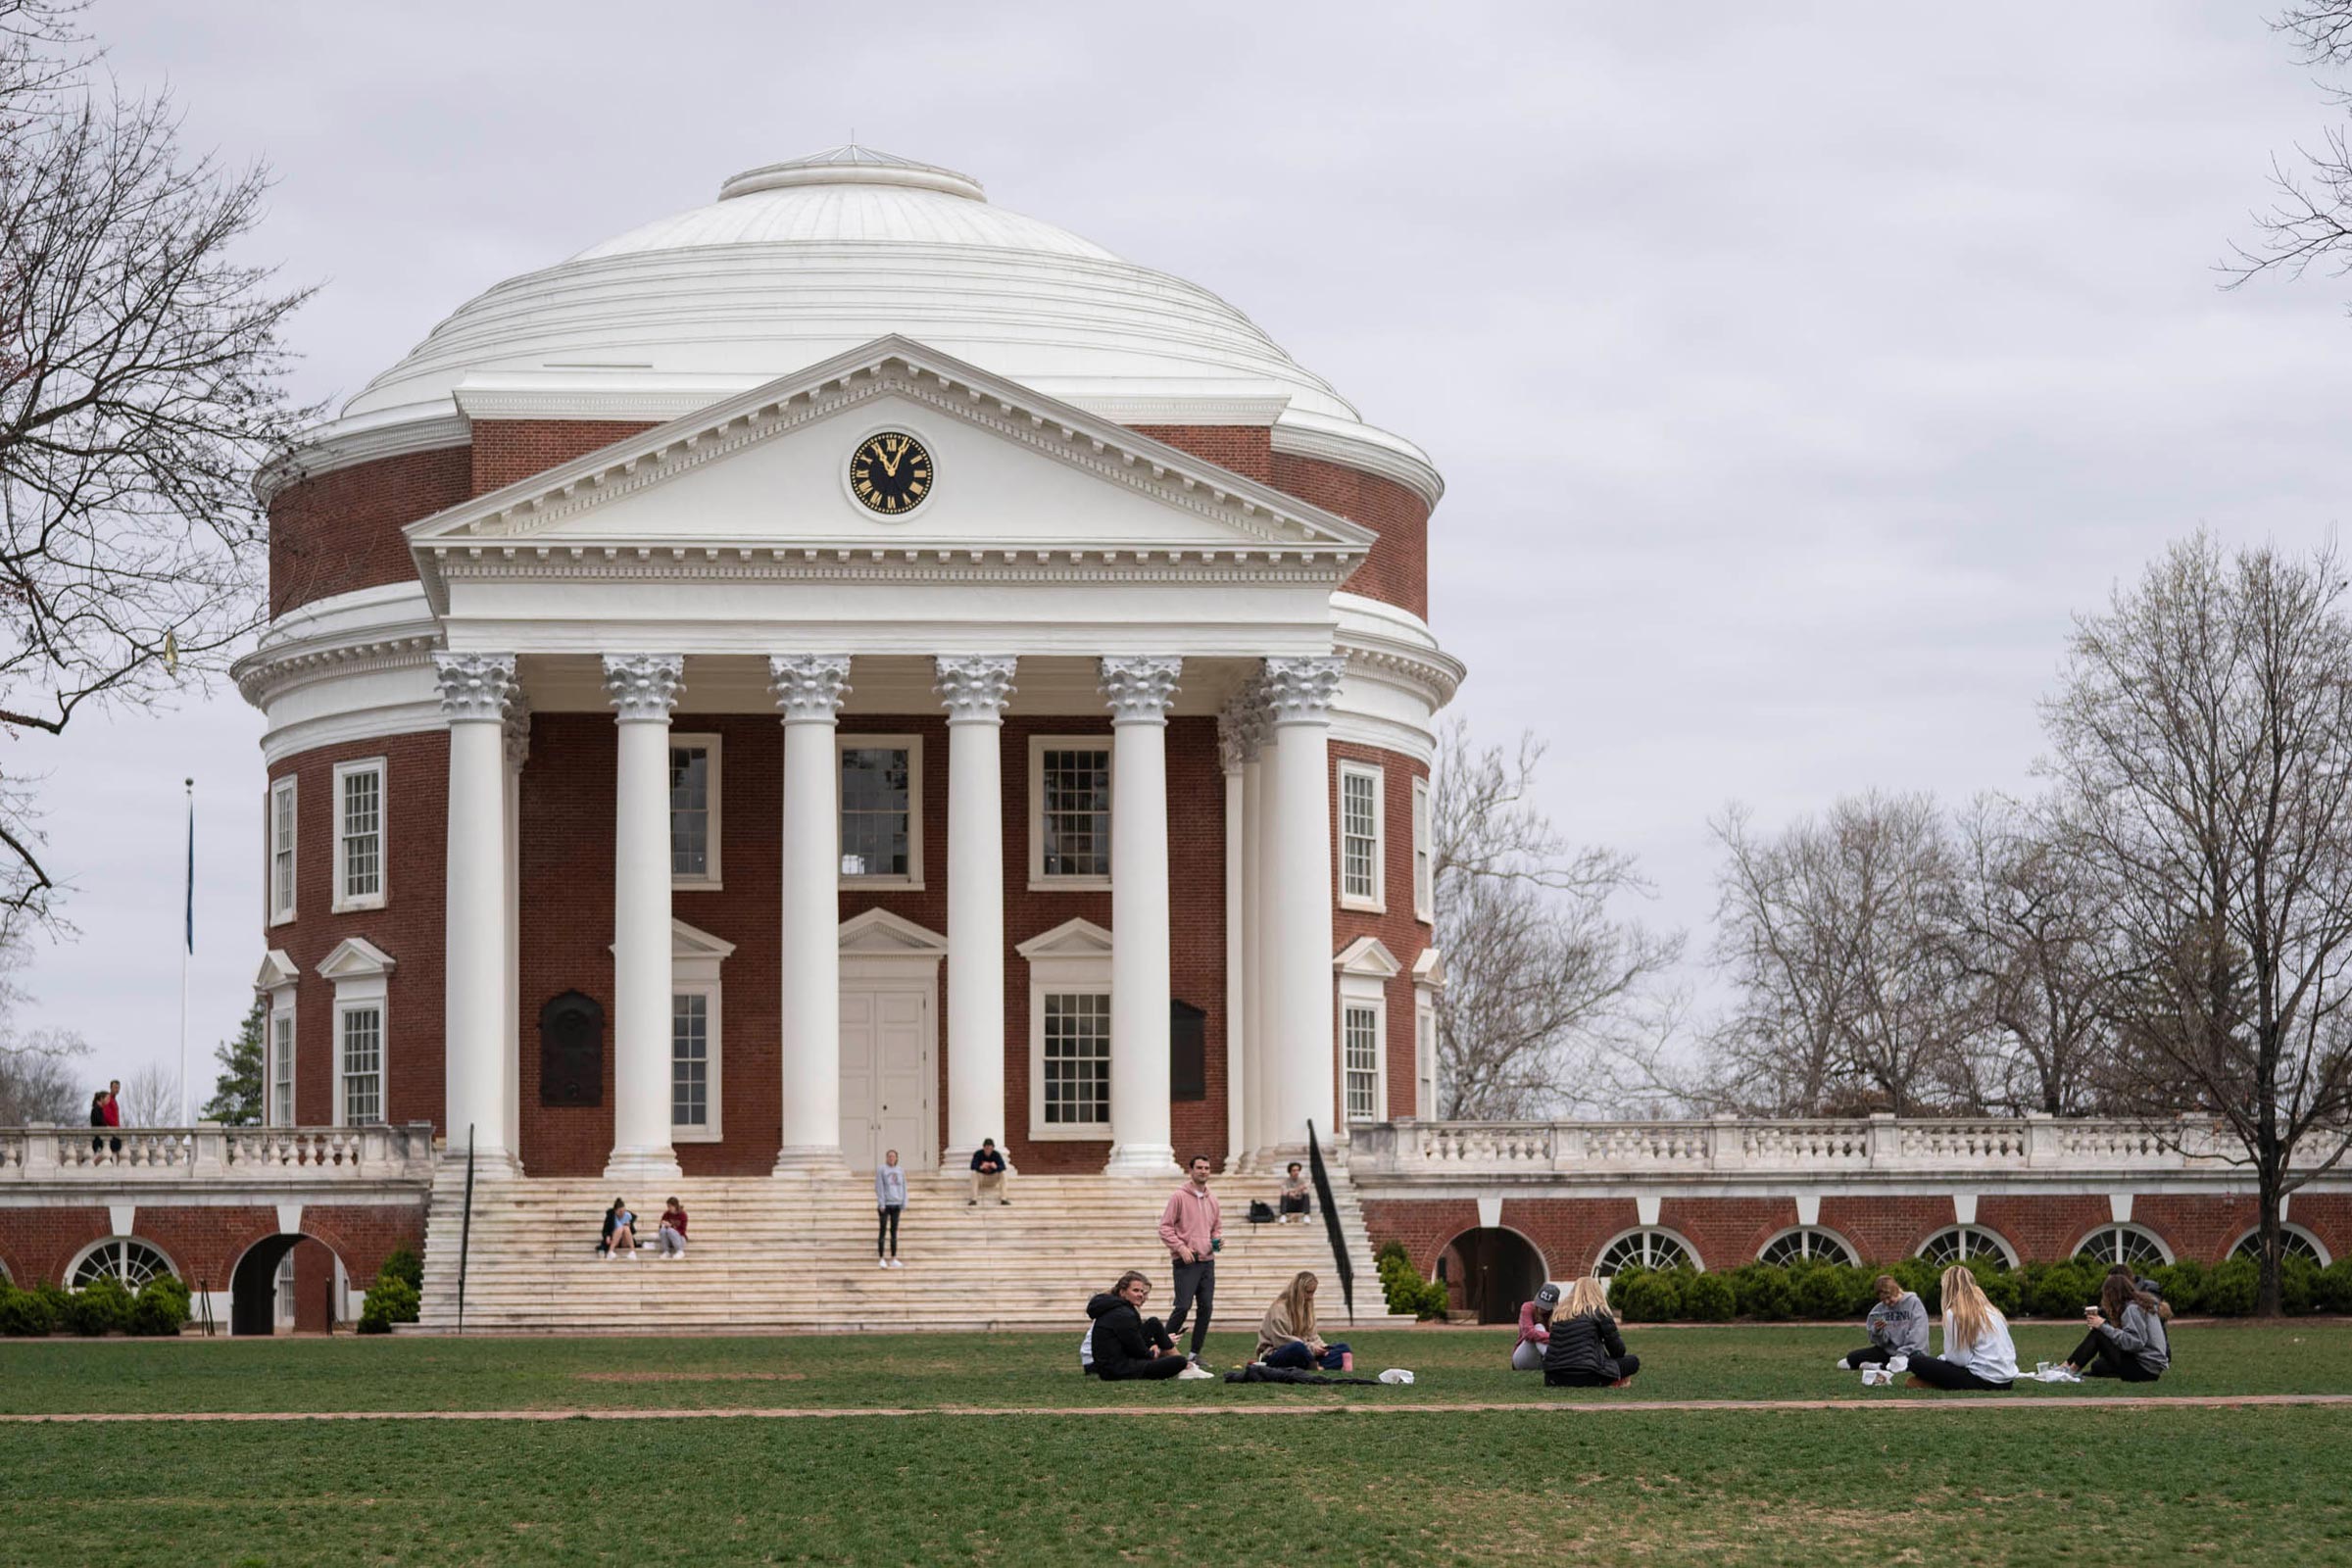 People sitting in front of the Rotunda on its steps and Lawn